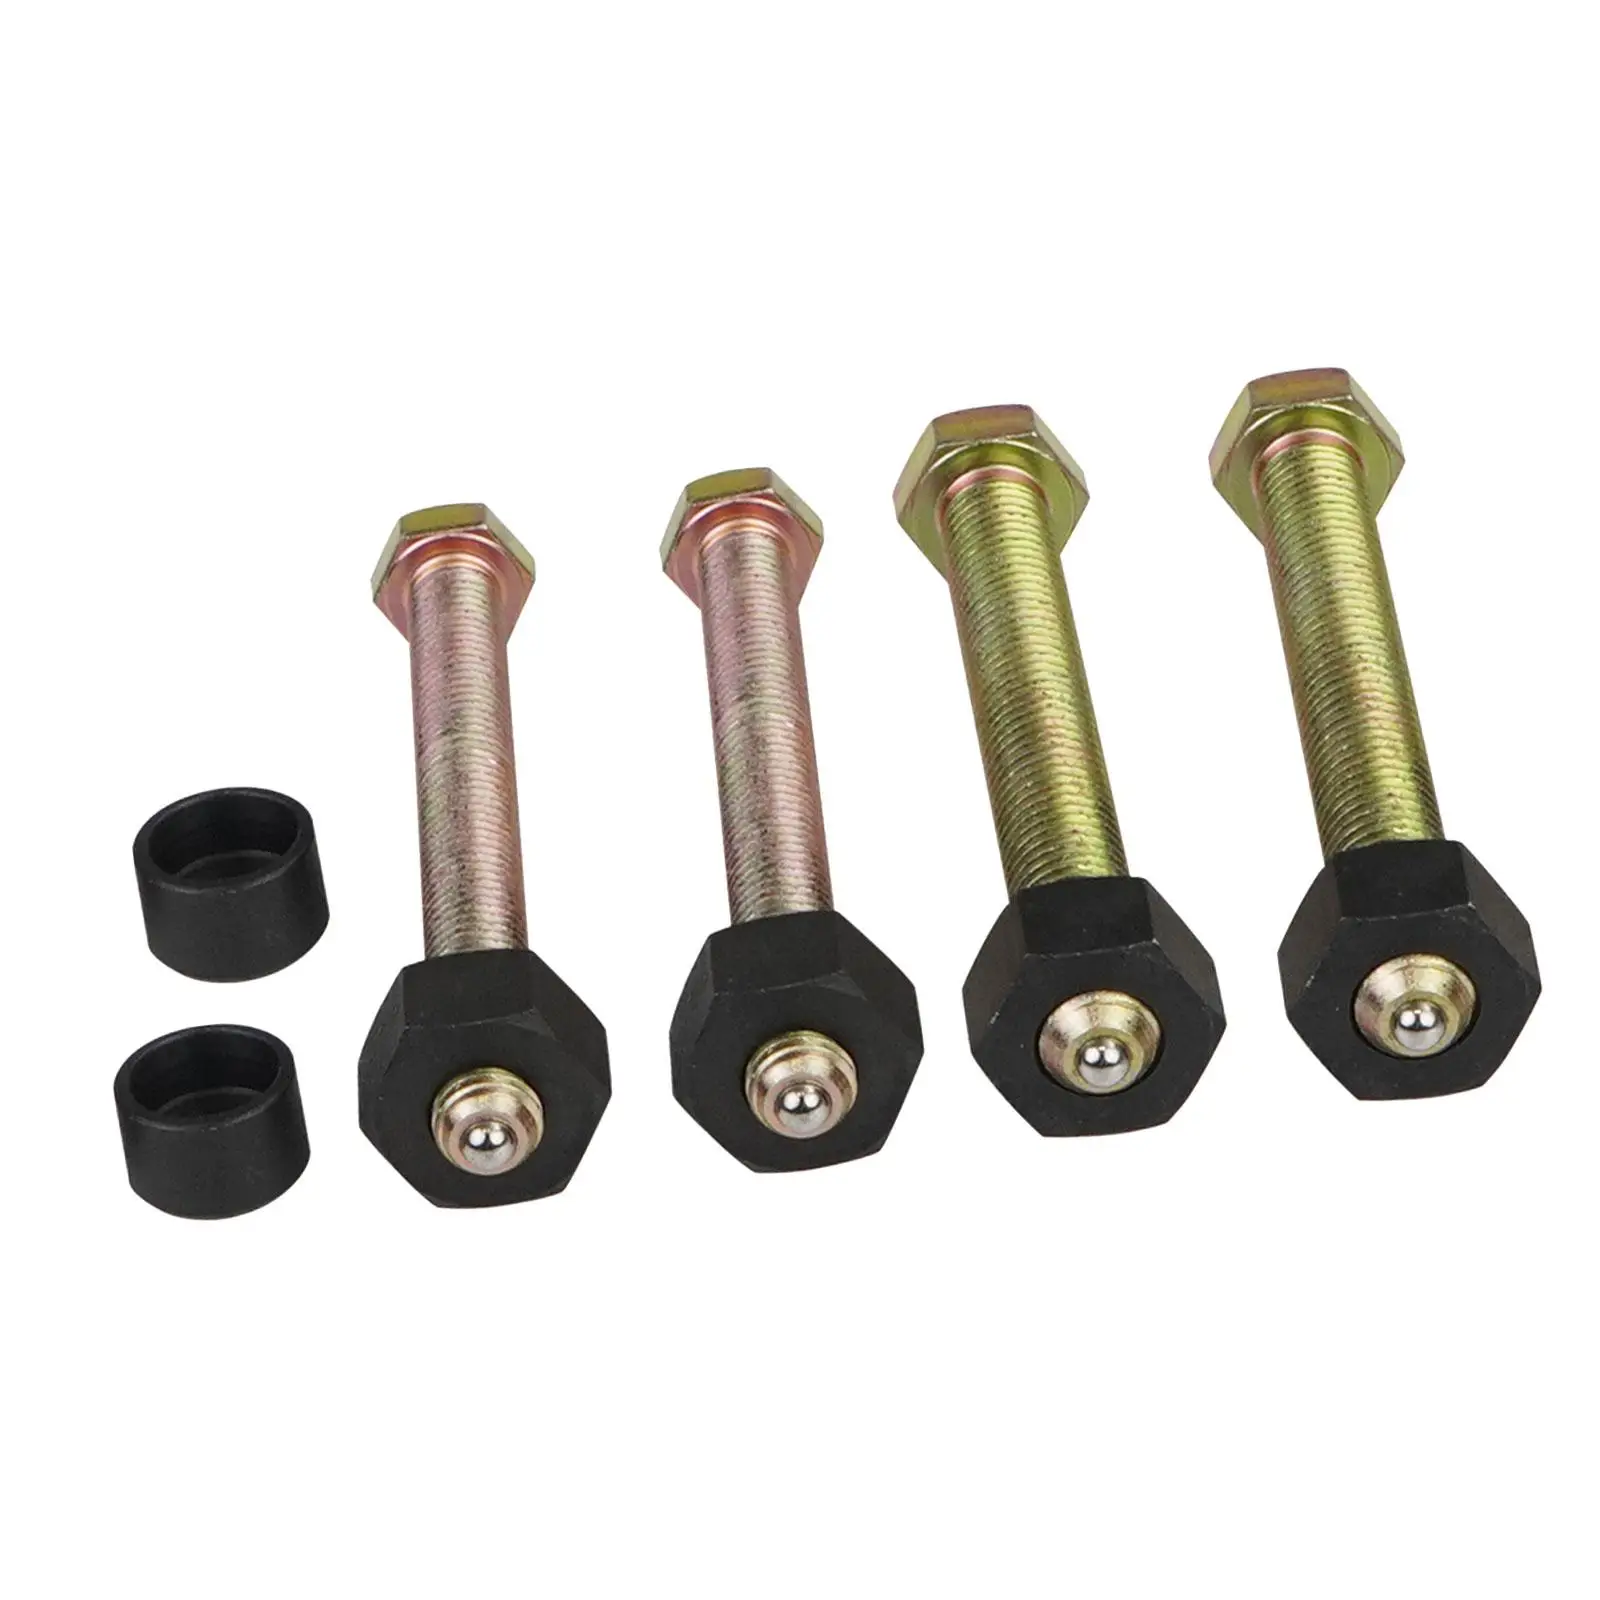 Impact Rated Hub Removal Bolt Set 78834 Assembly Accessory Easy Installation 3/4 inch 15/16 inch Threaded Rod Pneumatic Tools